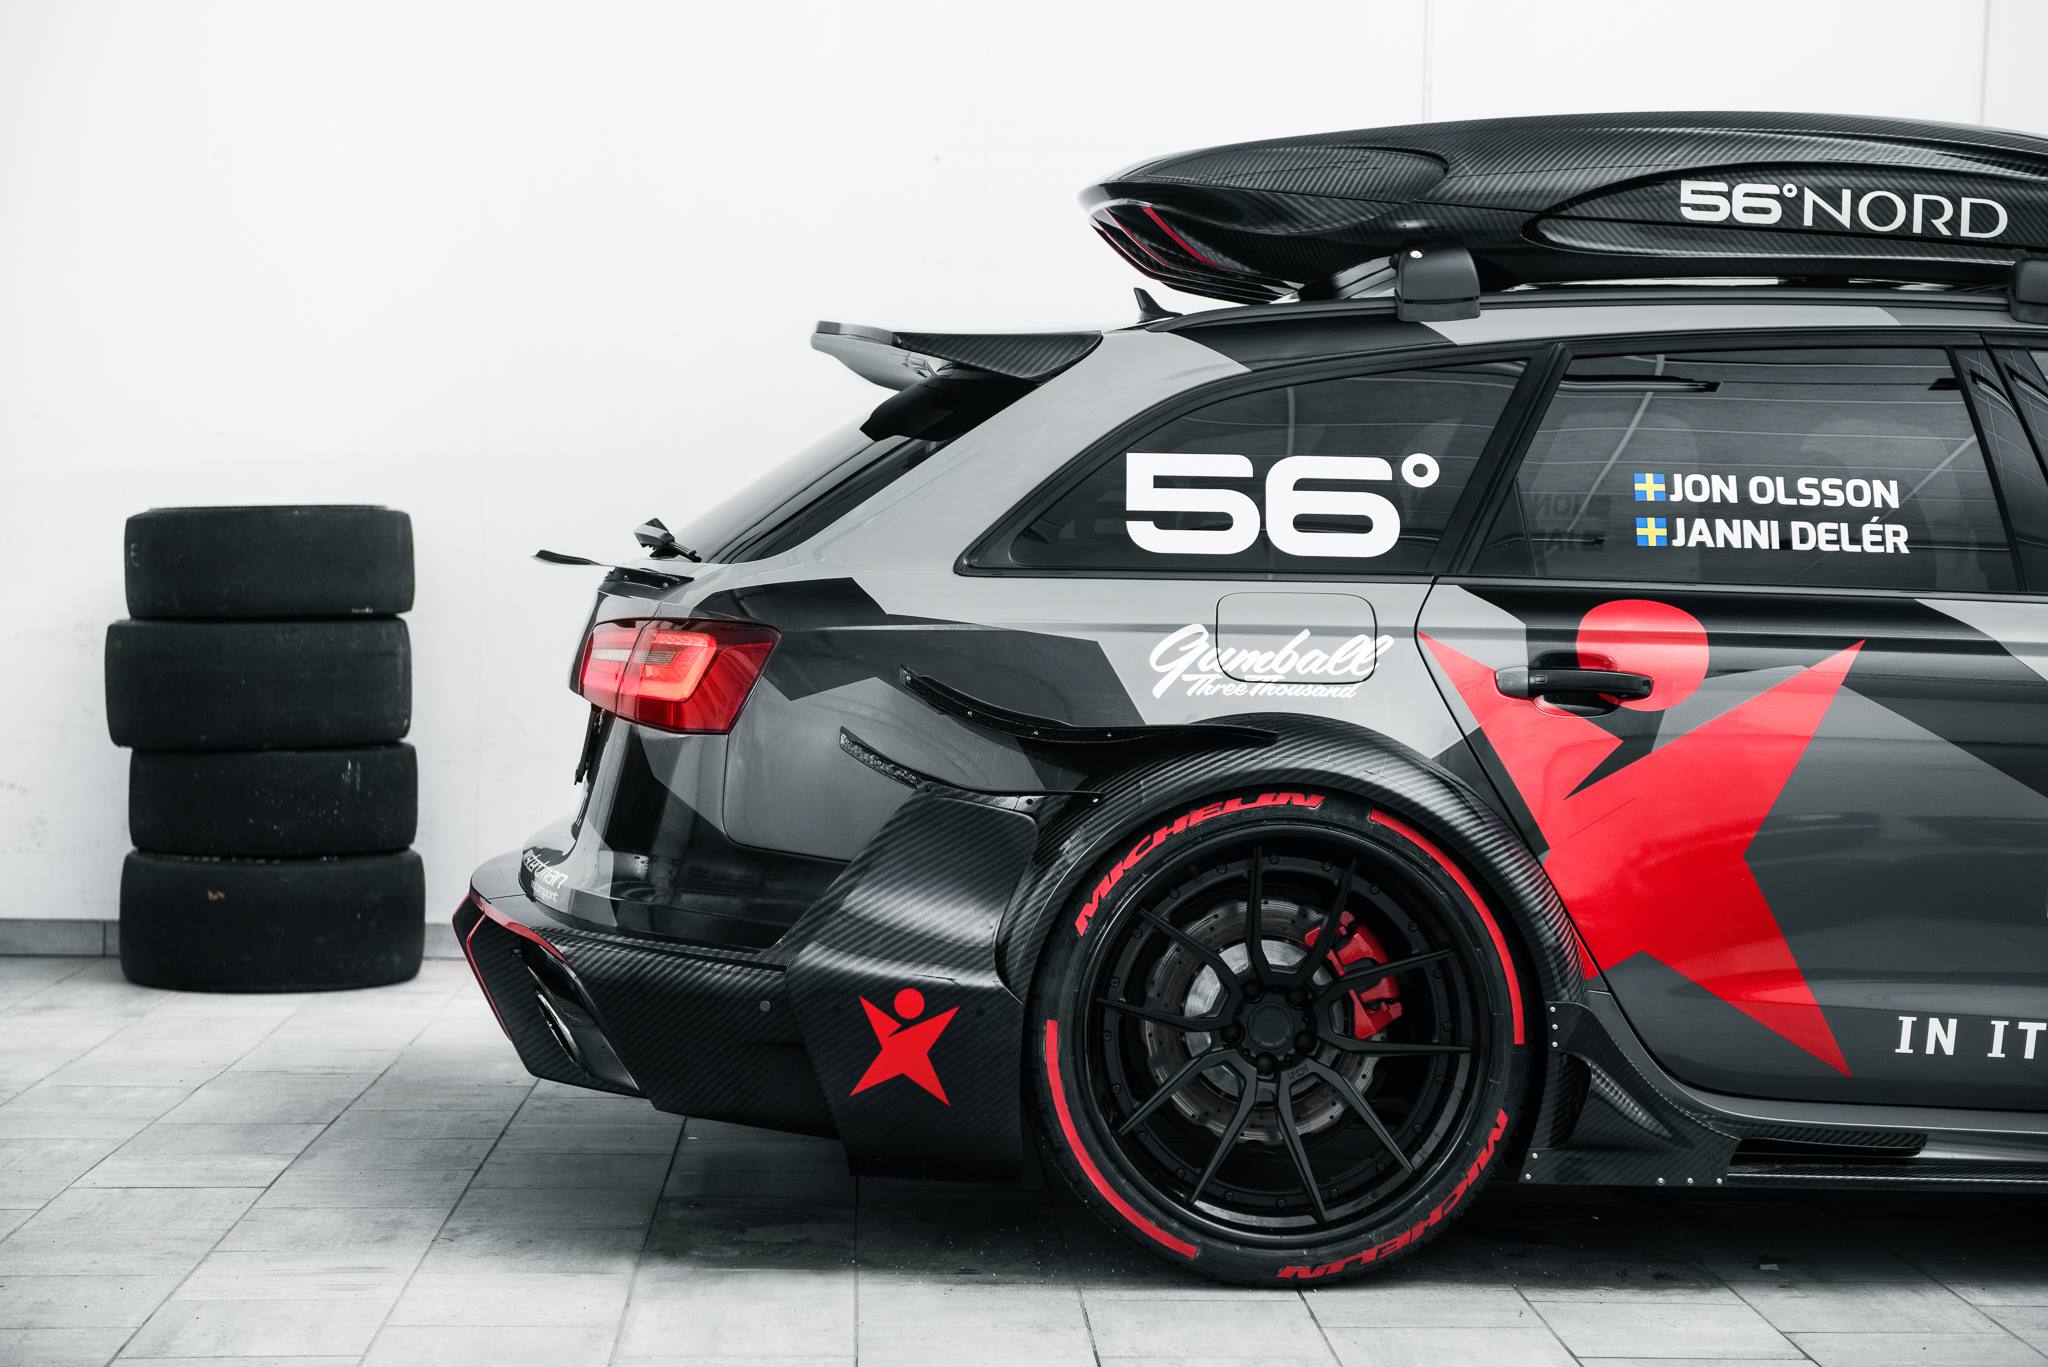 1000-hp-audi-rs6-owned-by-jon-olsson-burns-to-the-ground-in-armed-robbery-attack_2.jpg